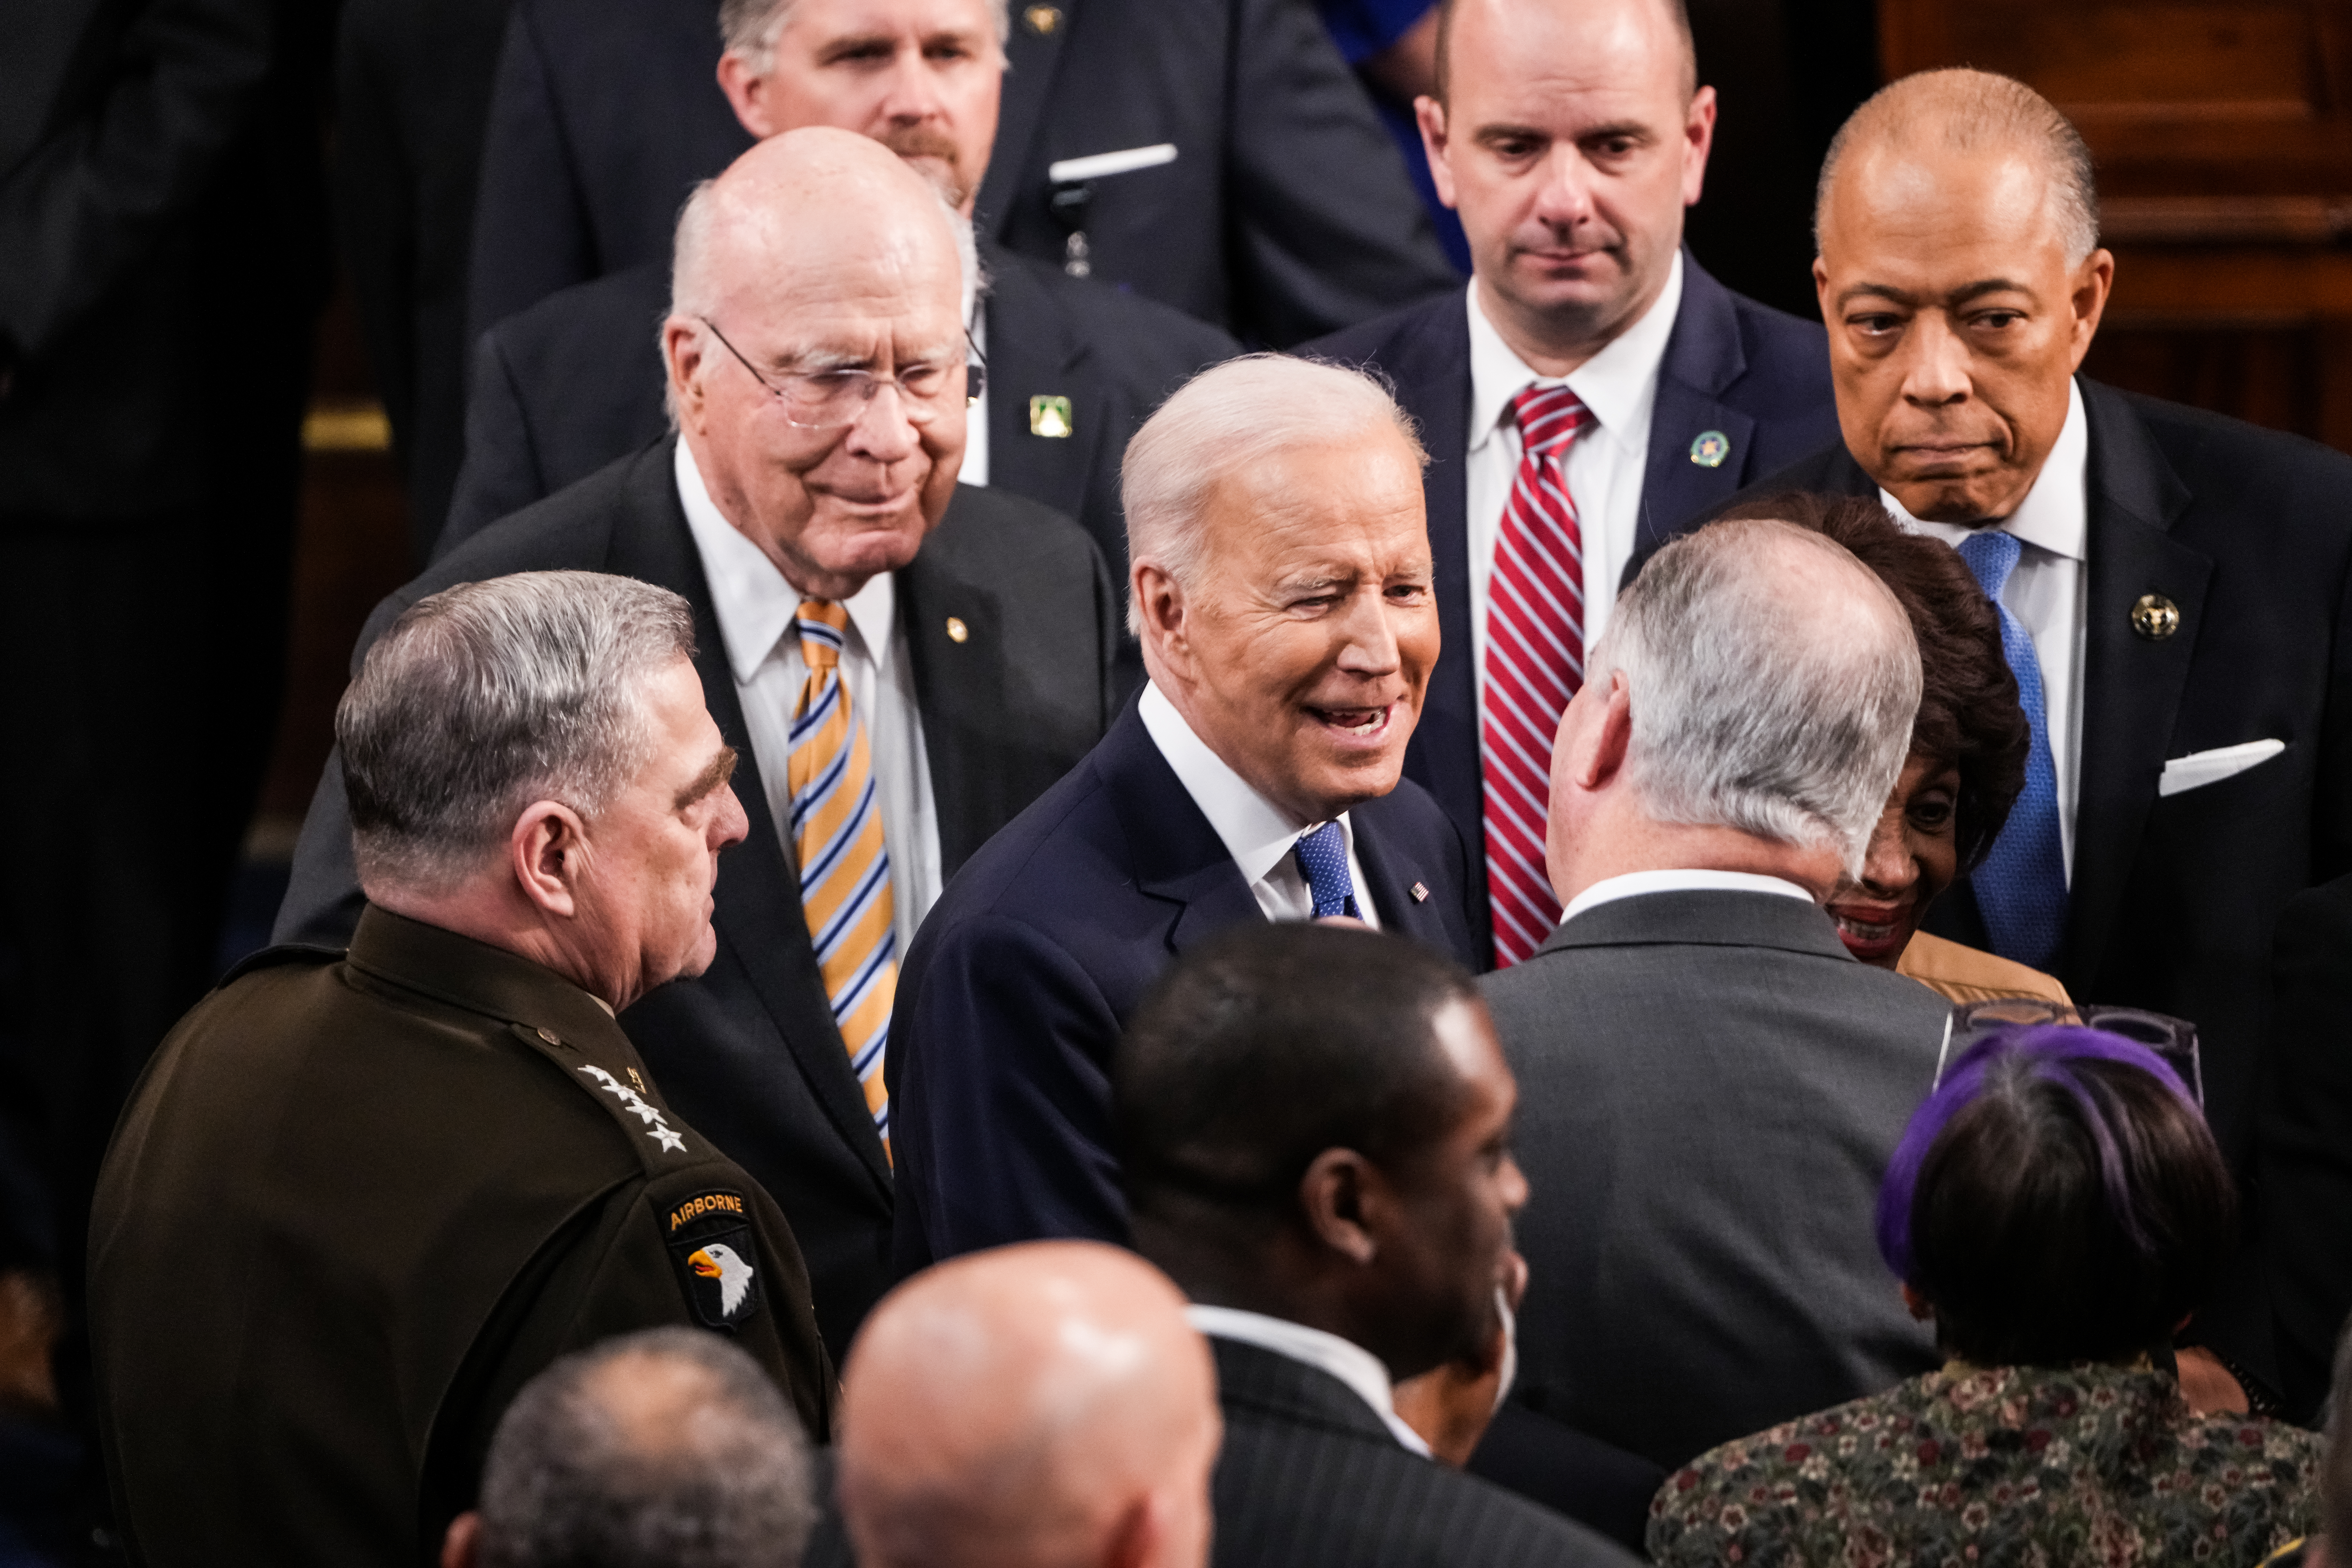 NYTSOTU2022 - President Joe Biden departing after delivering his State of the Union Address to Congress in the Capitol on March 01, 2022 in Washington, DC. During his first State of the Union address, Biden spoke on his administration’s efforts to lead a global response to the Russian invasion of Ukraine, work to curb inflation, and bring the country out of the COVID-19 pandemic. (Photo by Sarahbeth Maney-Pool/Getty Images)